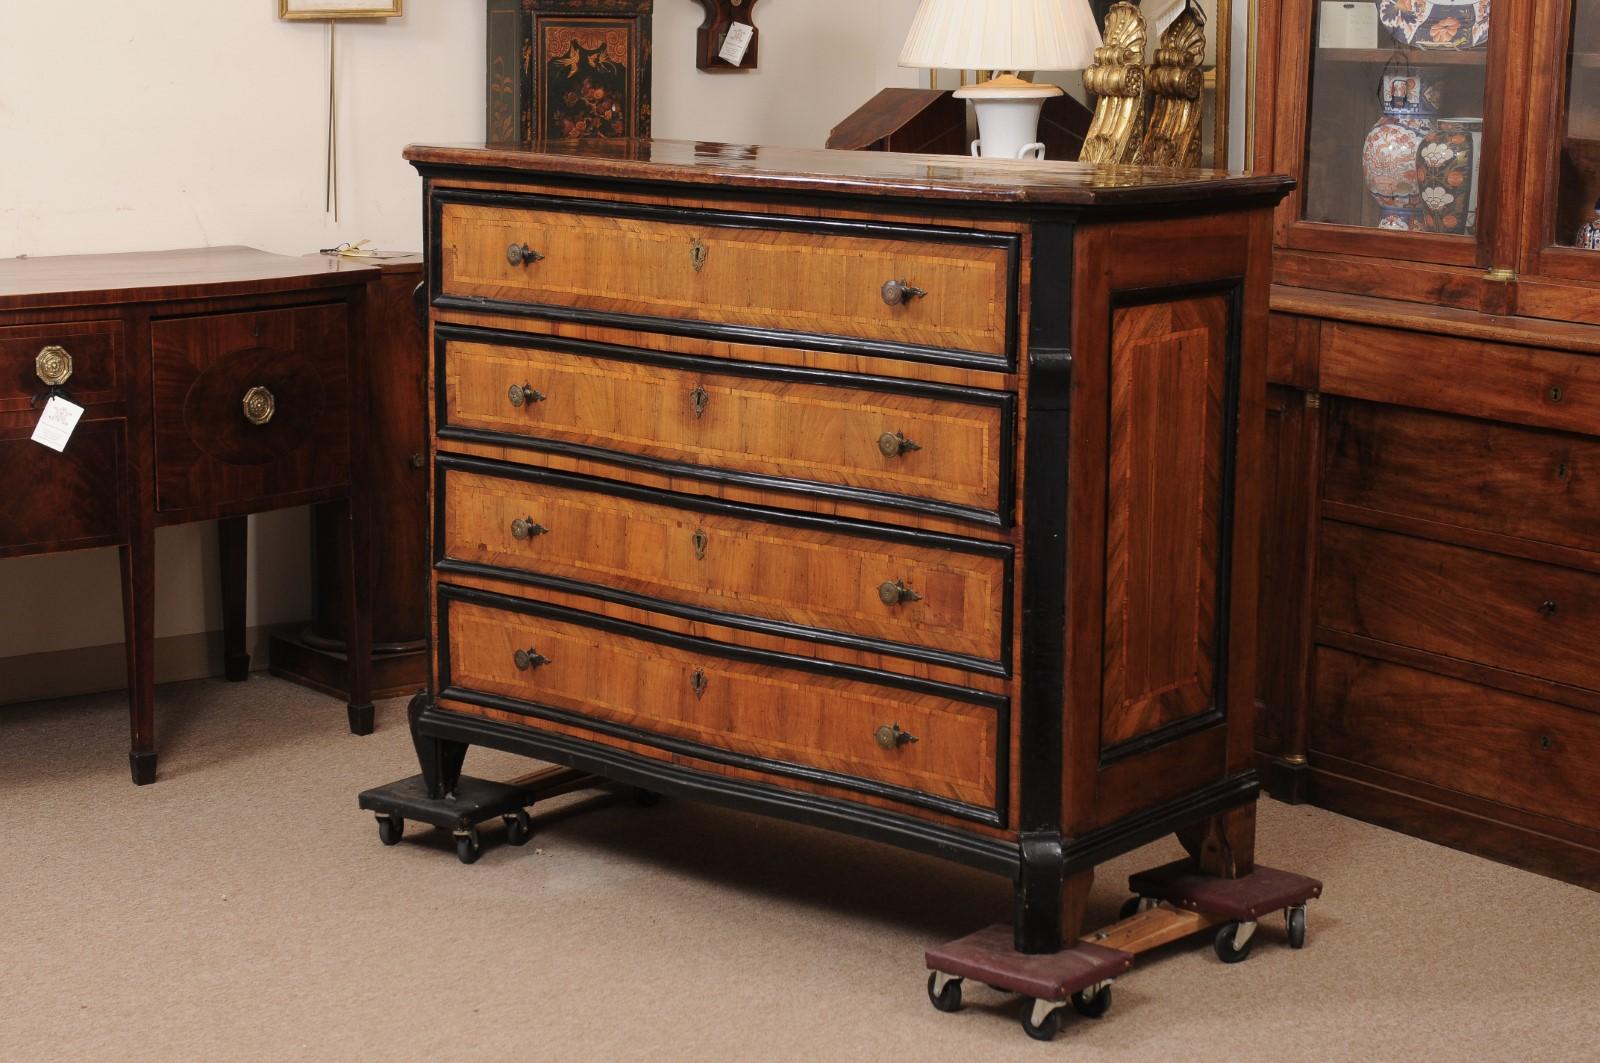 Large Early 18th Century Italian Canterano Walnut Inlaid Commode with 4 Drawers  For Sale 9